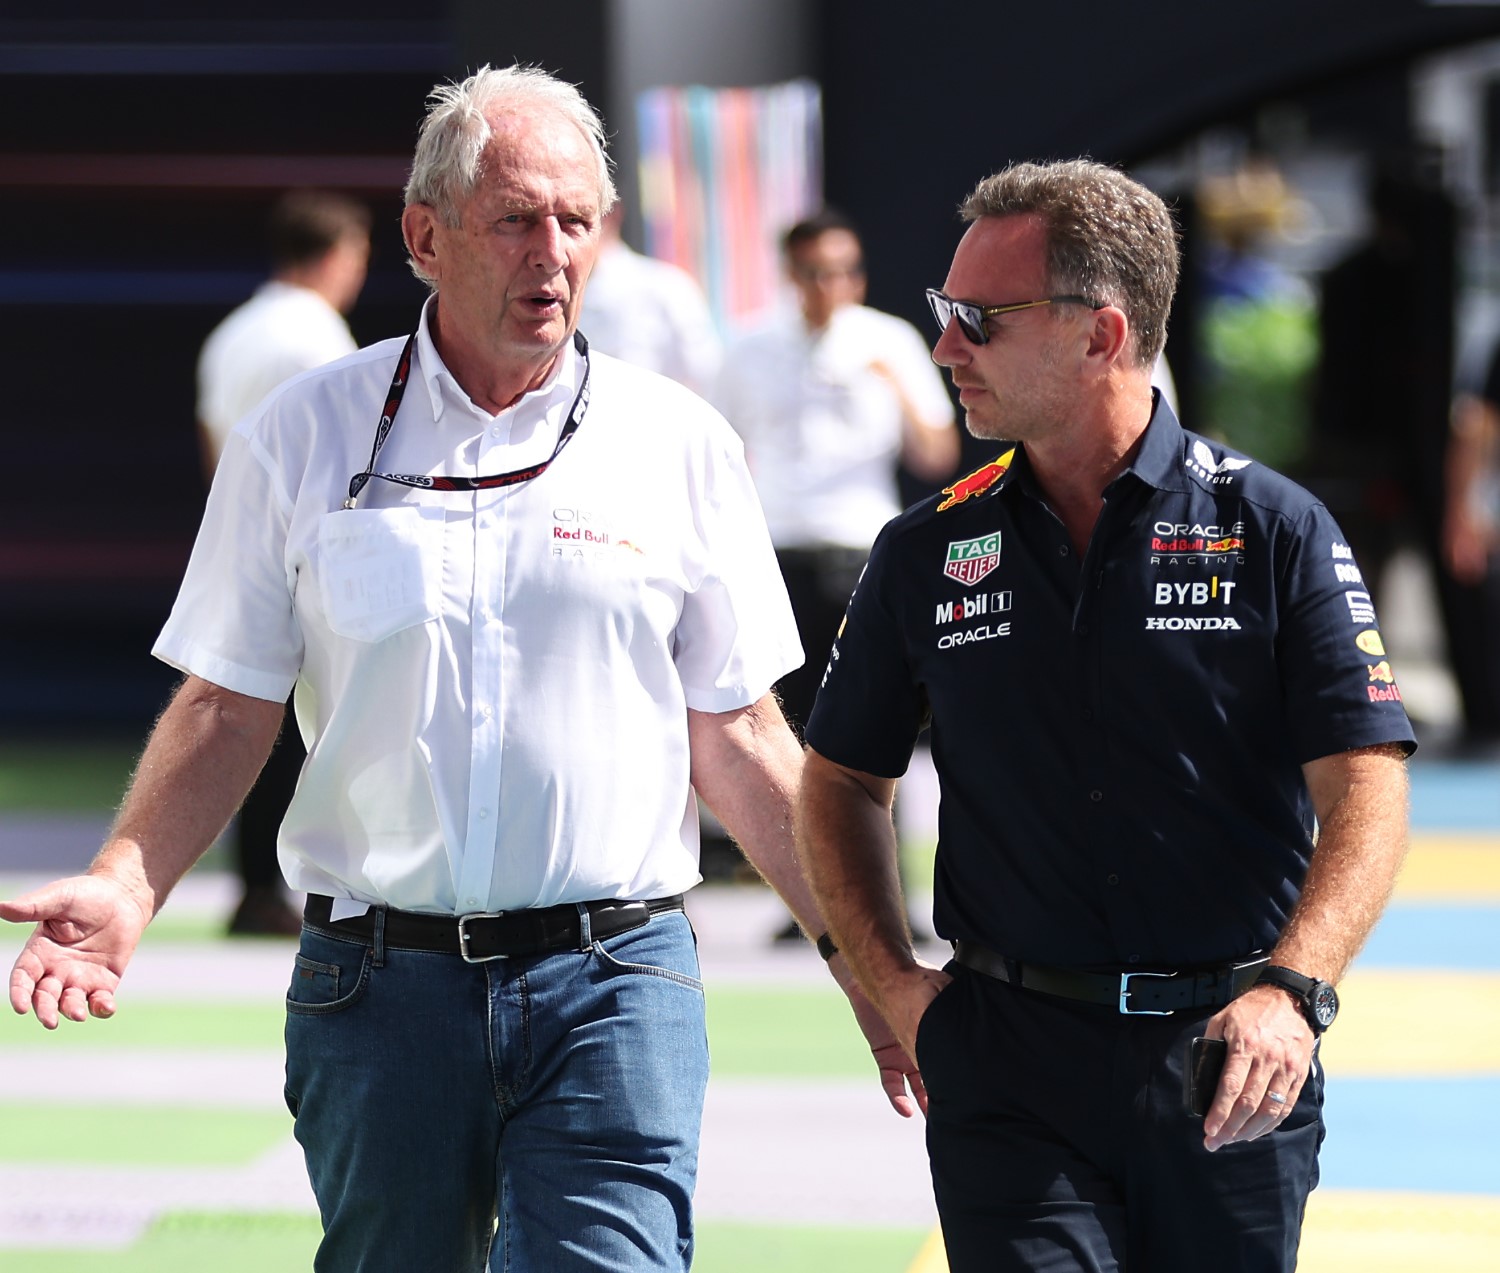 Red Bull Racing Team Consultant Dr Helmut Marko and Red Bull Racing Team Principal Christian Horner walk in the Paddock prior to final practice ahead of the F1 Grand Prix of Saudi Arabia at Jeddah Corniche Circuit on March 18, 2023 in Jeddah, Saudi Arabia. (Photo by Lars Baron/Getty Images) // Getty Images / Red Bull Content Pool